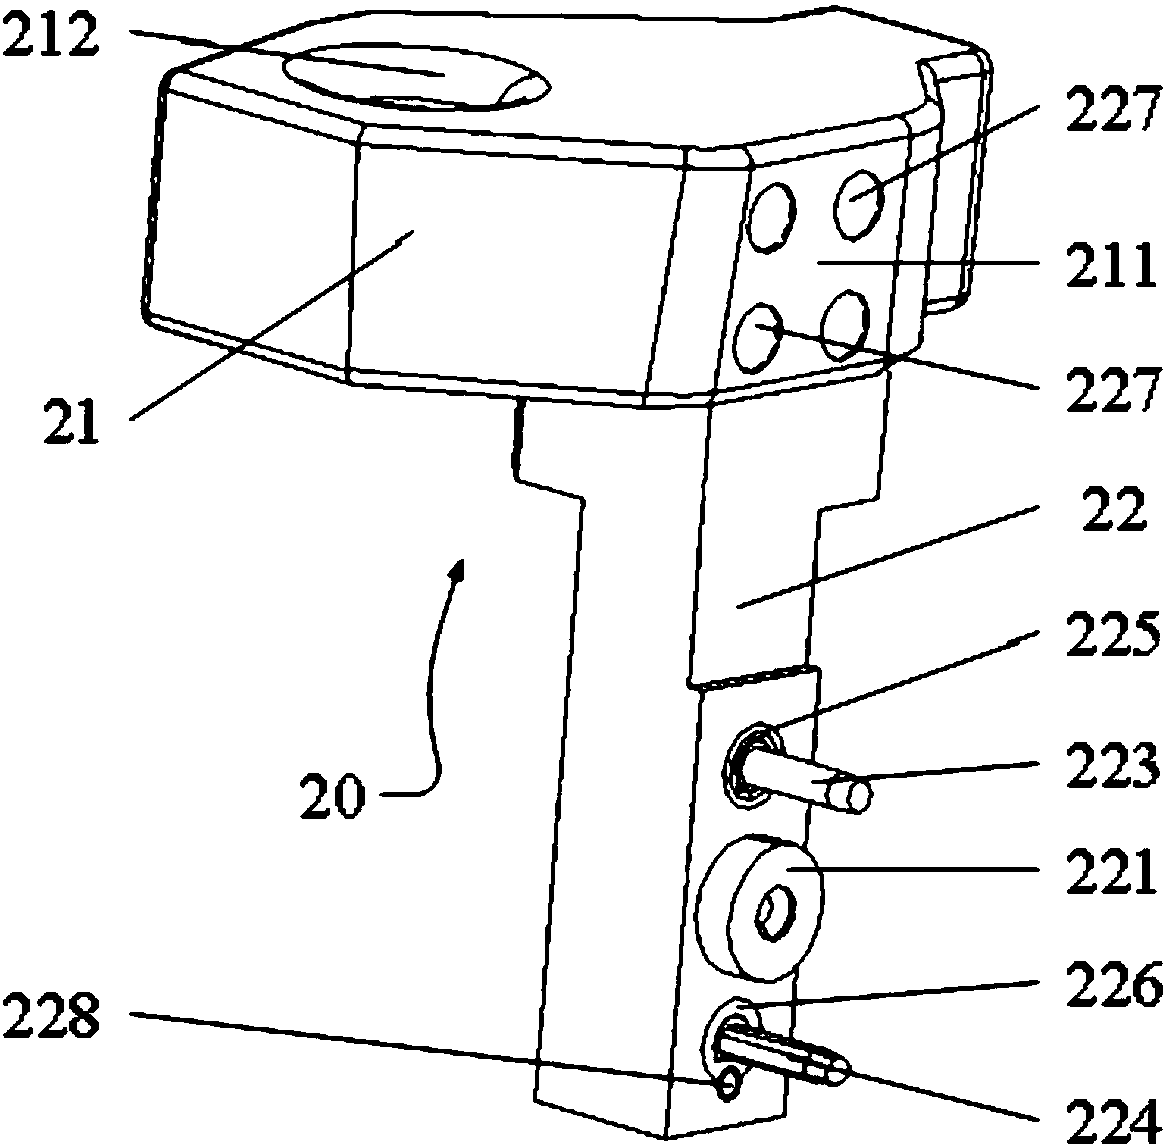 Back door ancillary supporting tool